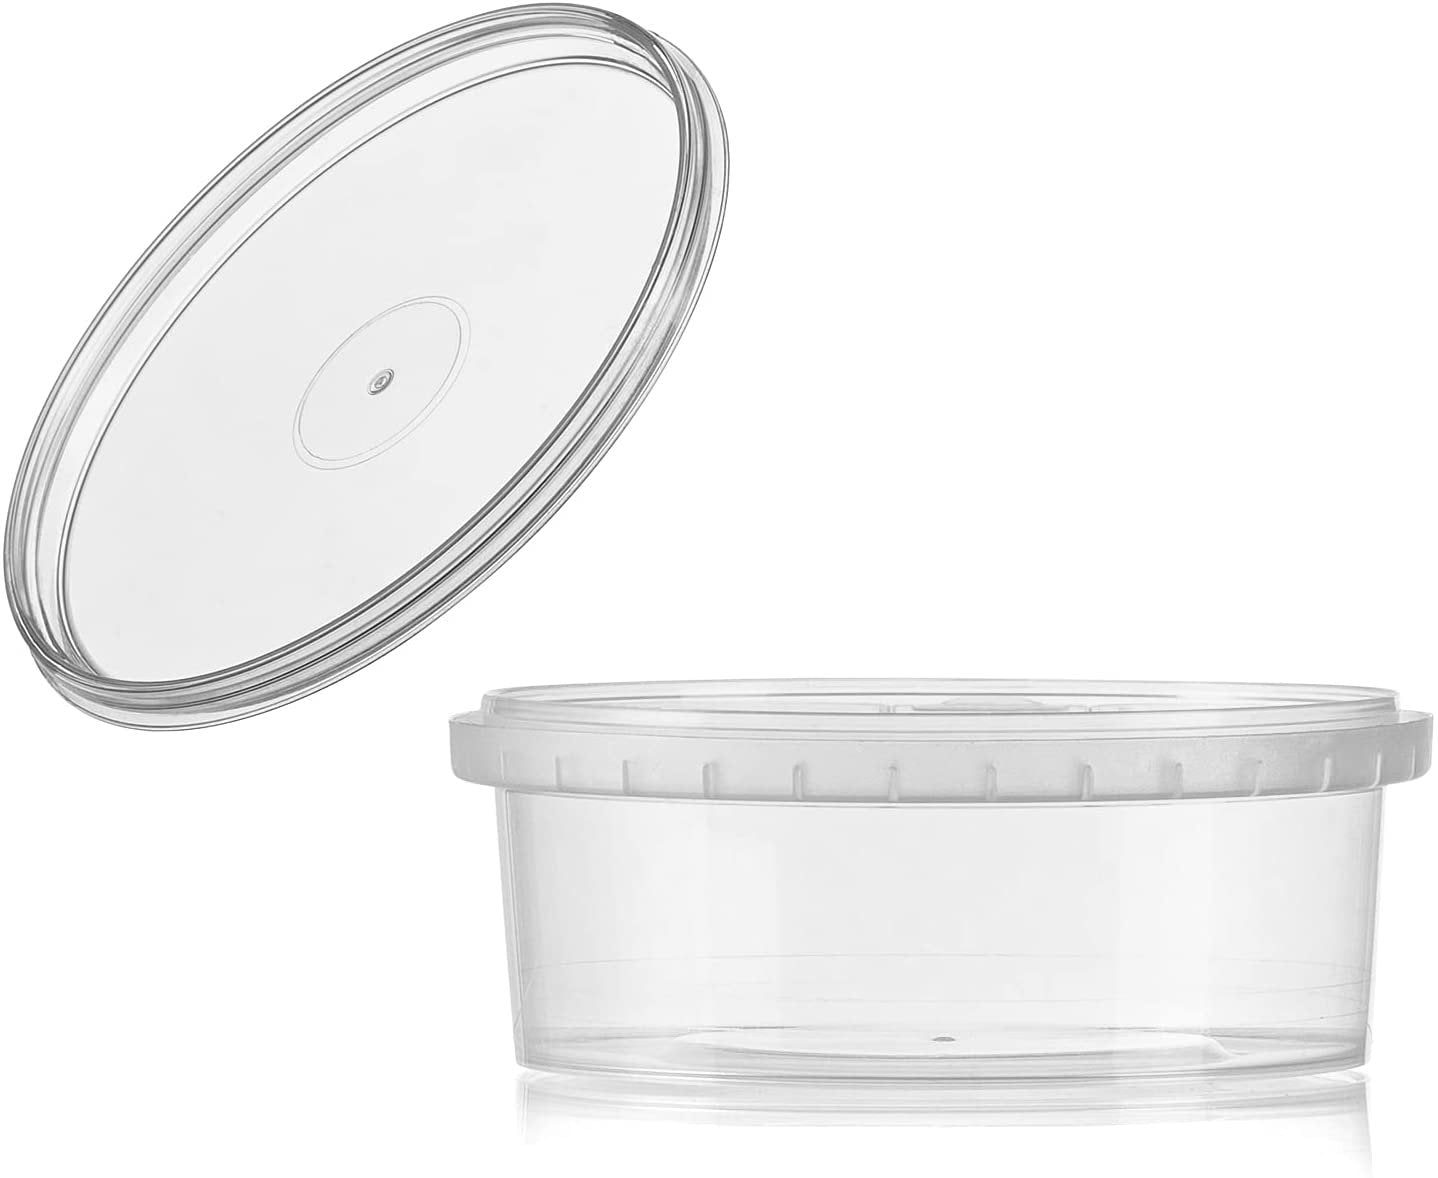  64-oz. Square Clear Deli Containers with Lids, Stackable,  Tamper-Proof BPA-Free Food Storage Containers, Recyclable Space Saver  Airtight Container for Kitchen Storage, Meal Prep, Take Out